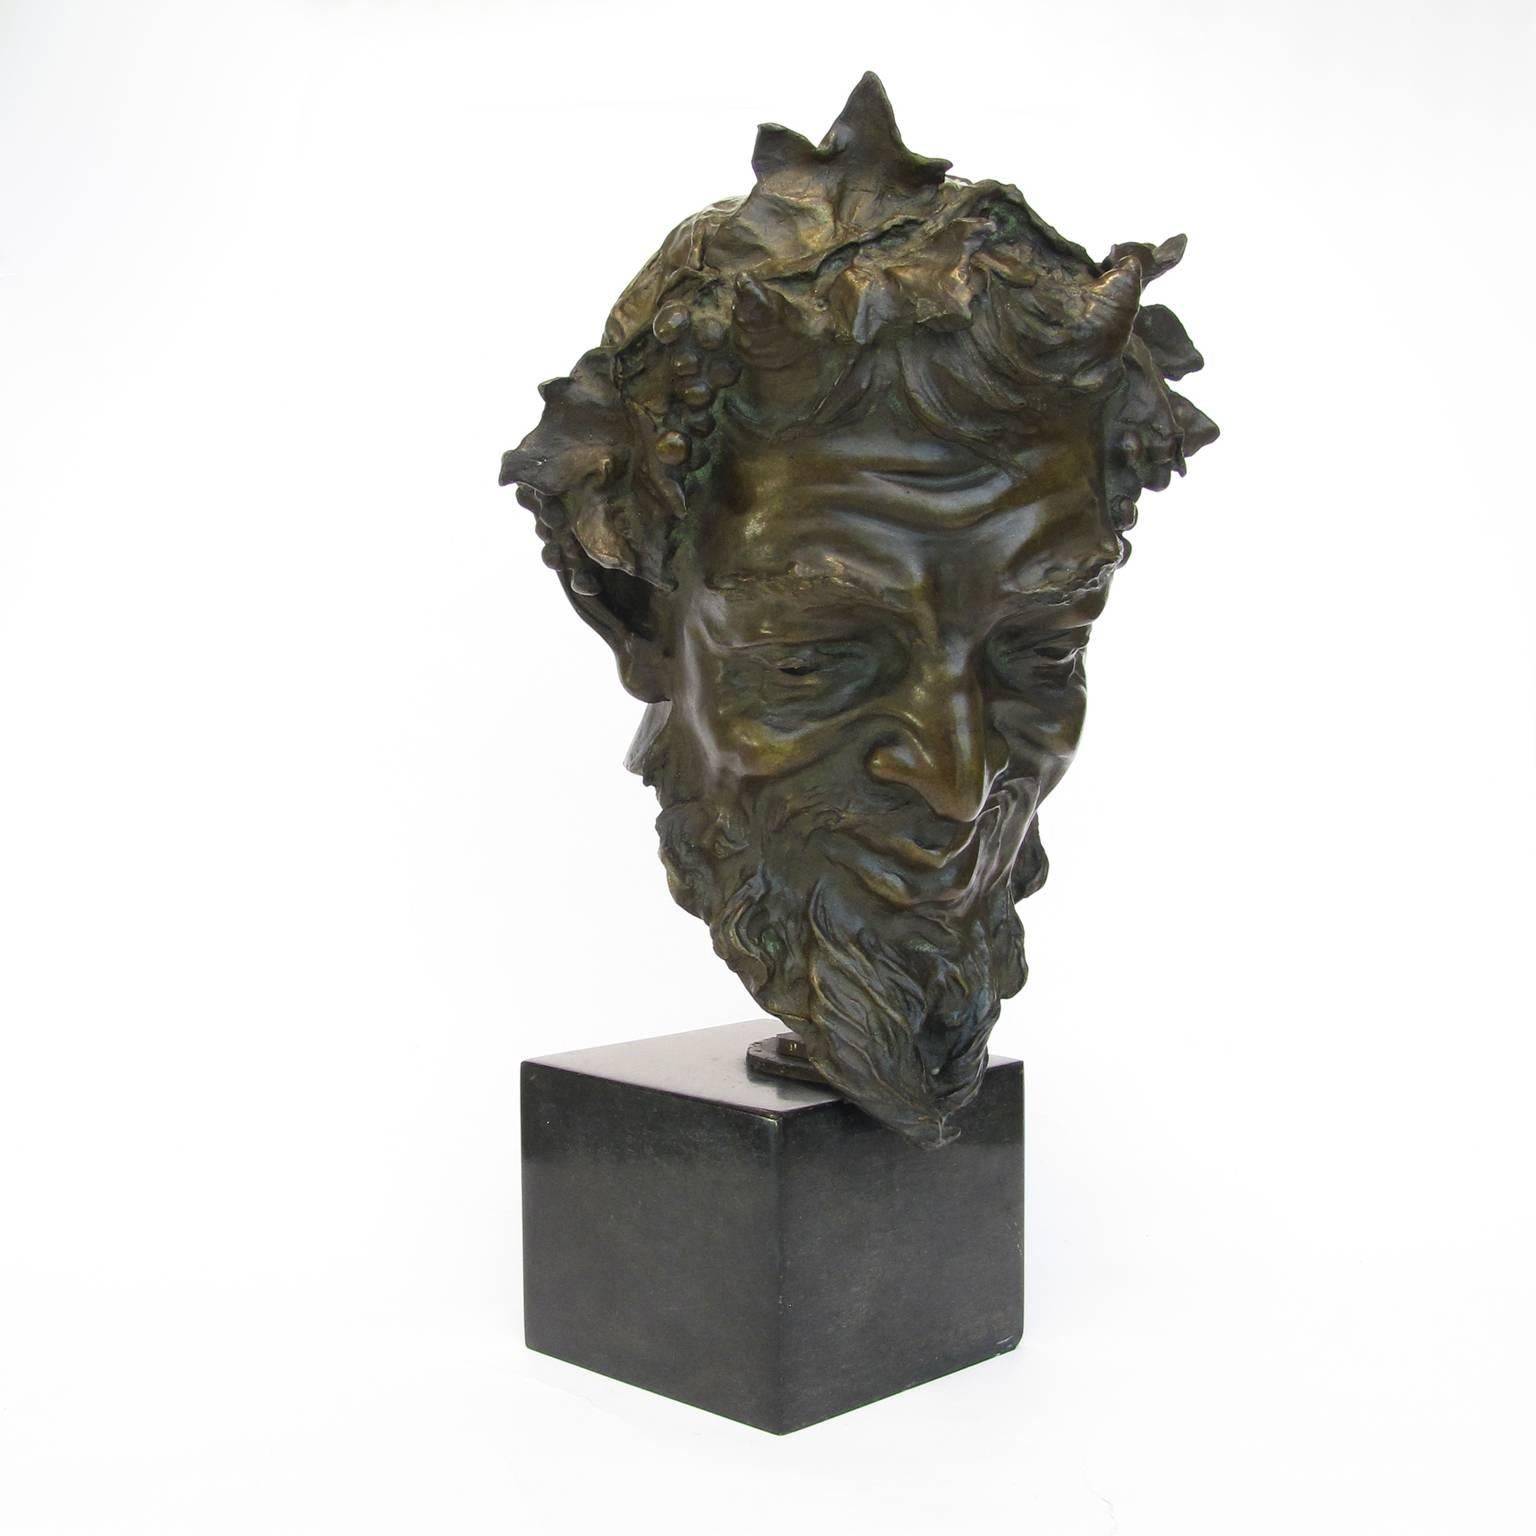 Vincenzo Gemito (1852-1929)
Bronze head of a faun
Lost wax bronze cast, mounted on a dark marble base
Signed: V. Gemito
Italy (Naples), late 19th century.
          